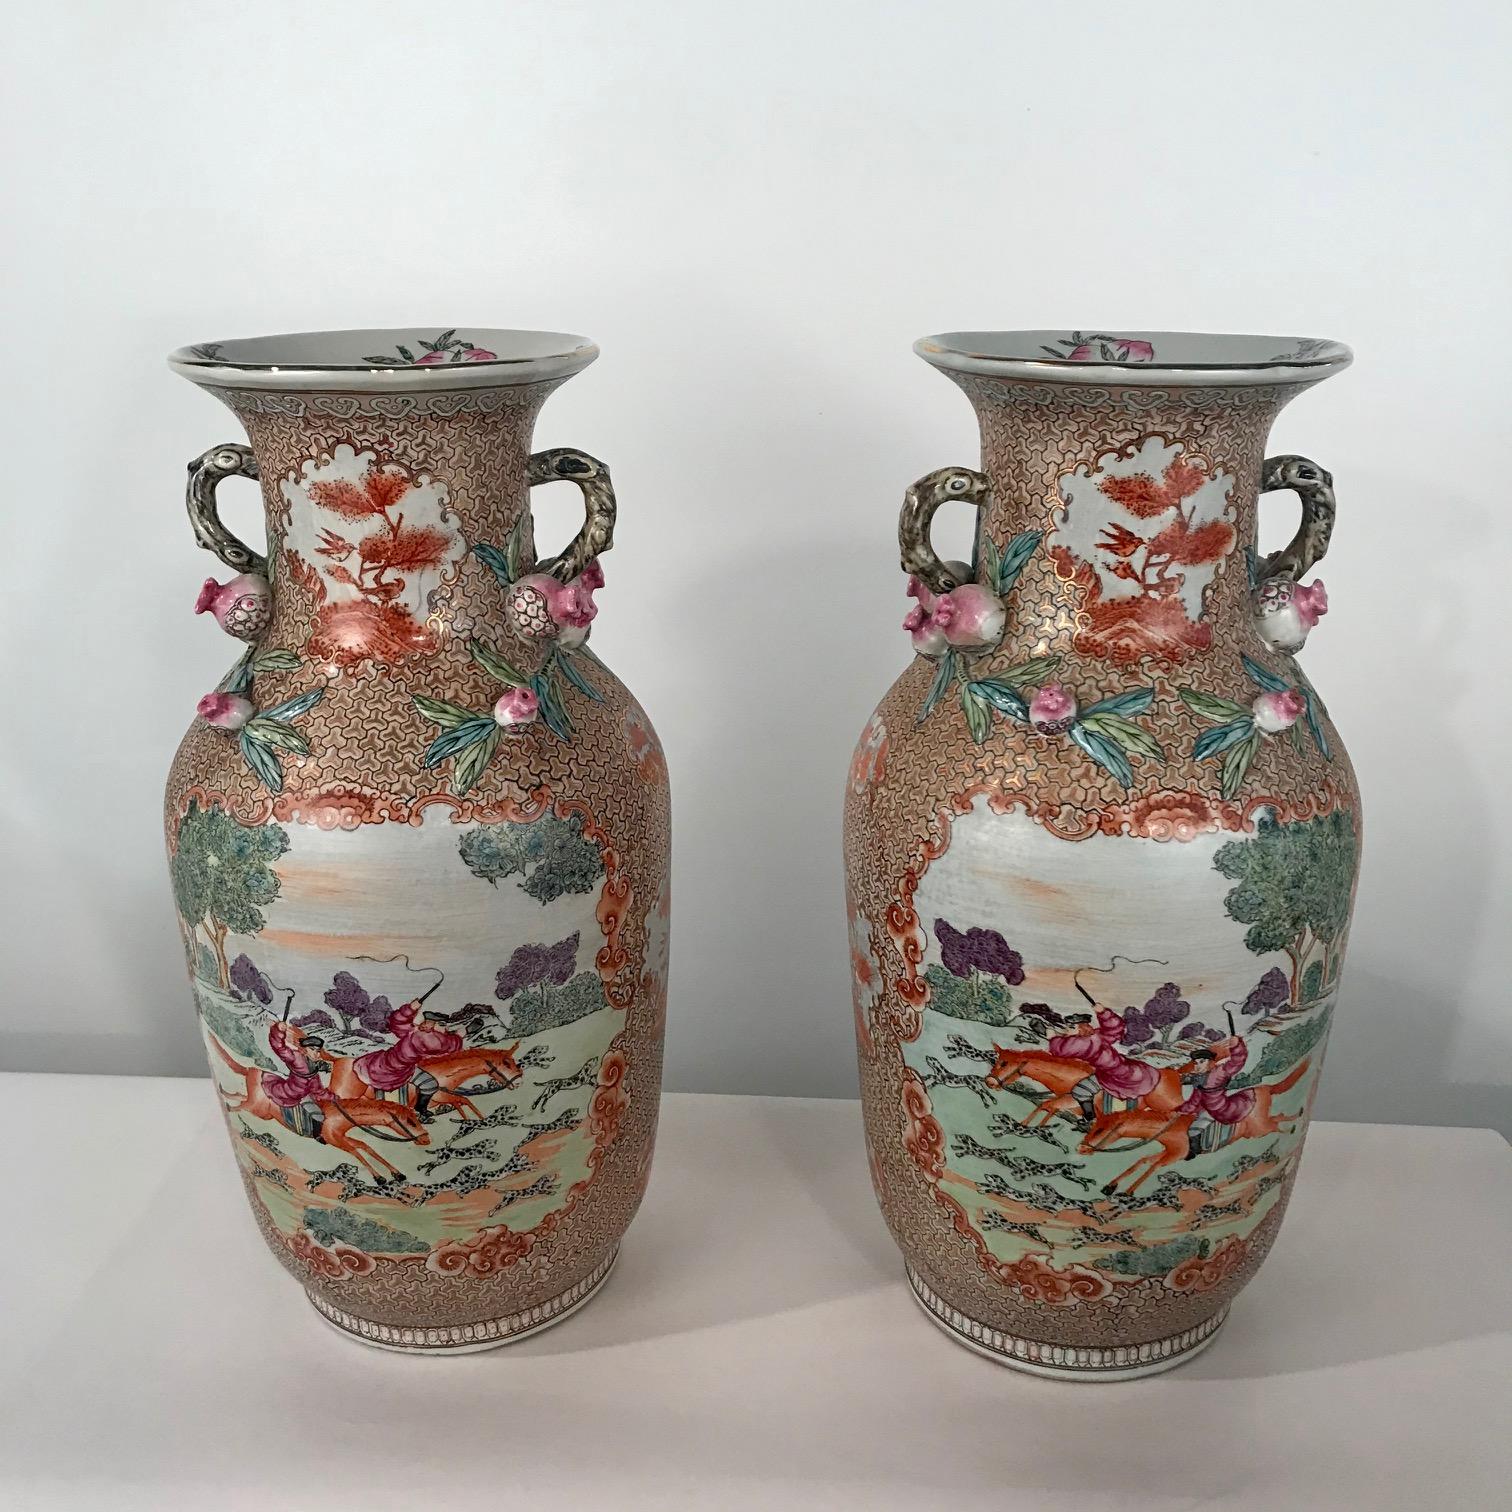 Large Pair of Chinese Export Vases in the Rockefeller Palette In Good Condition For Sale In Montreal, QC